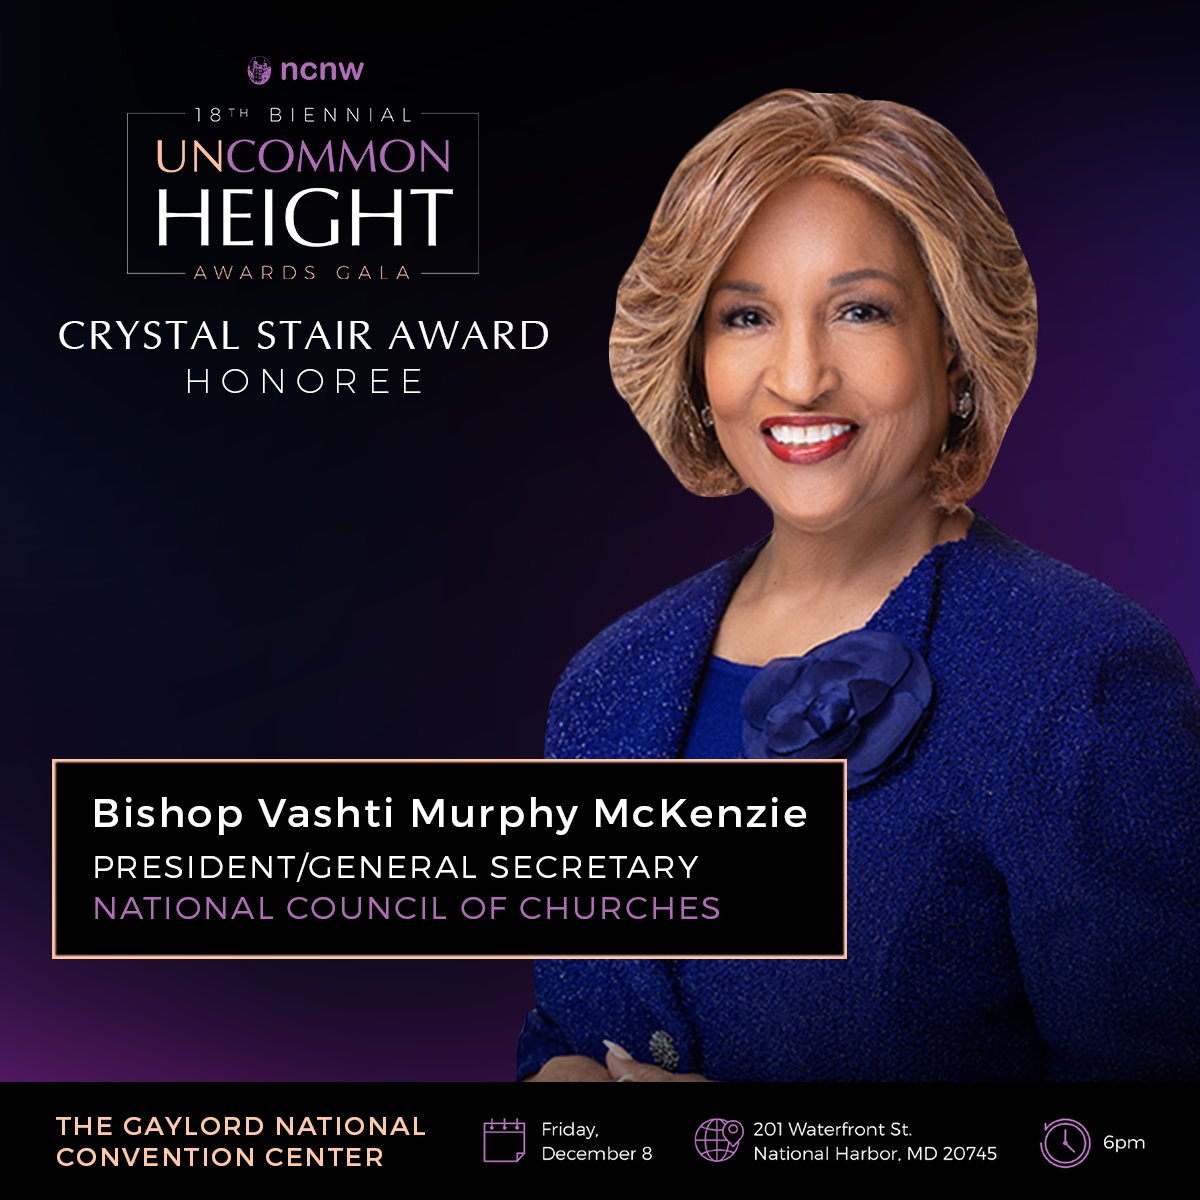 NCNW is proud to announce that Bishop Vashti Murphy McKenzie will be the Crystal Stair Award Honoree at the 18th Biennial Uncommon Height Awards Gala. Buy tickets here: bit.ly/uncommonheight. #uncommonheight2023 #awards Learn more at ncnw.org @shavonarline